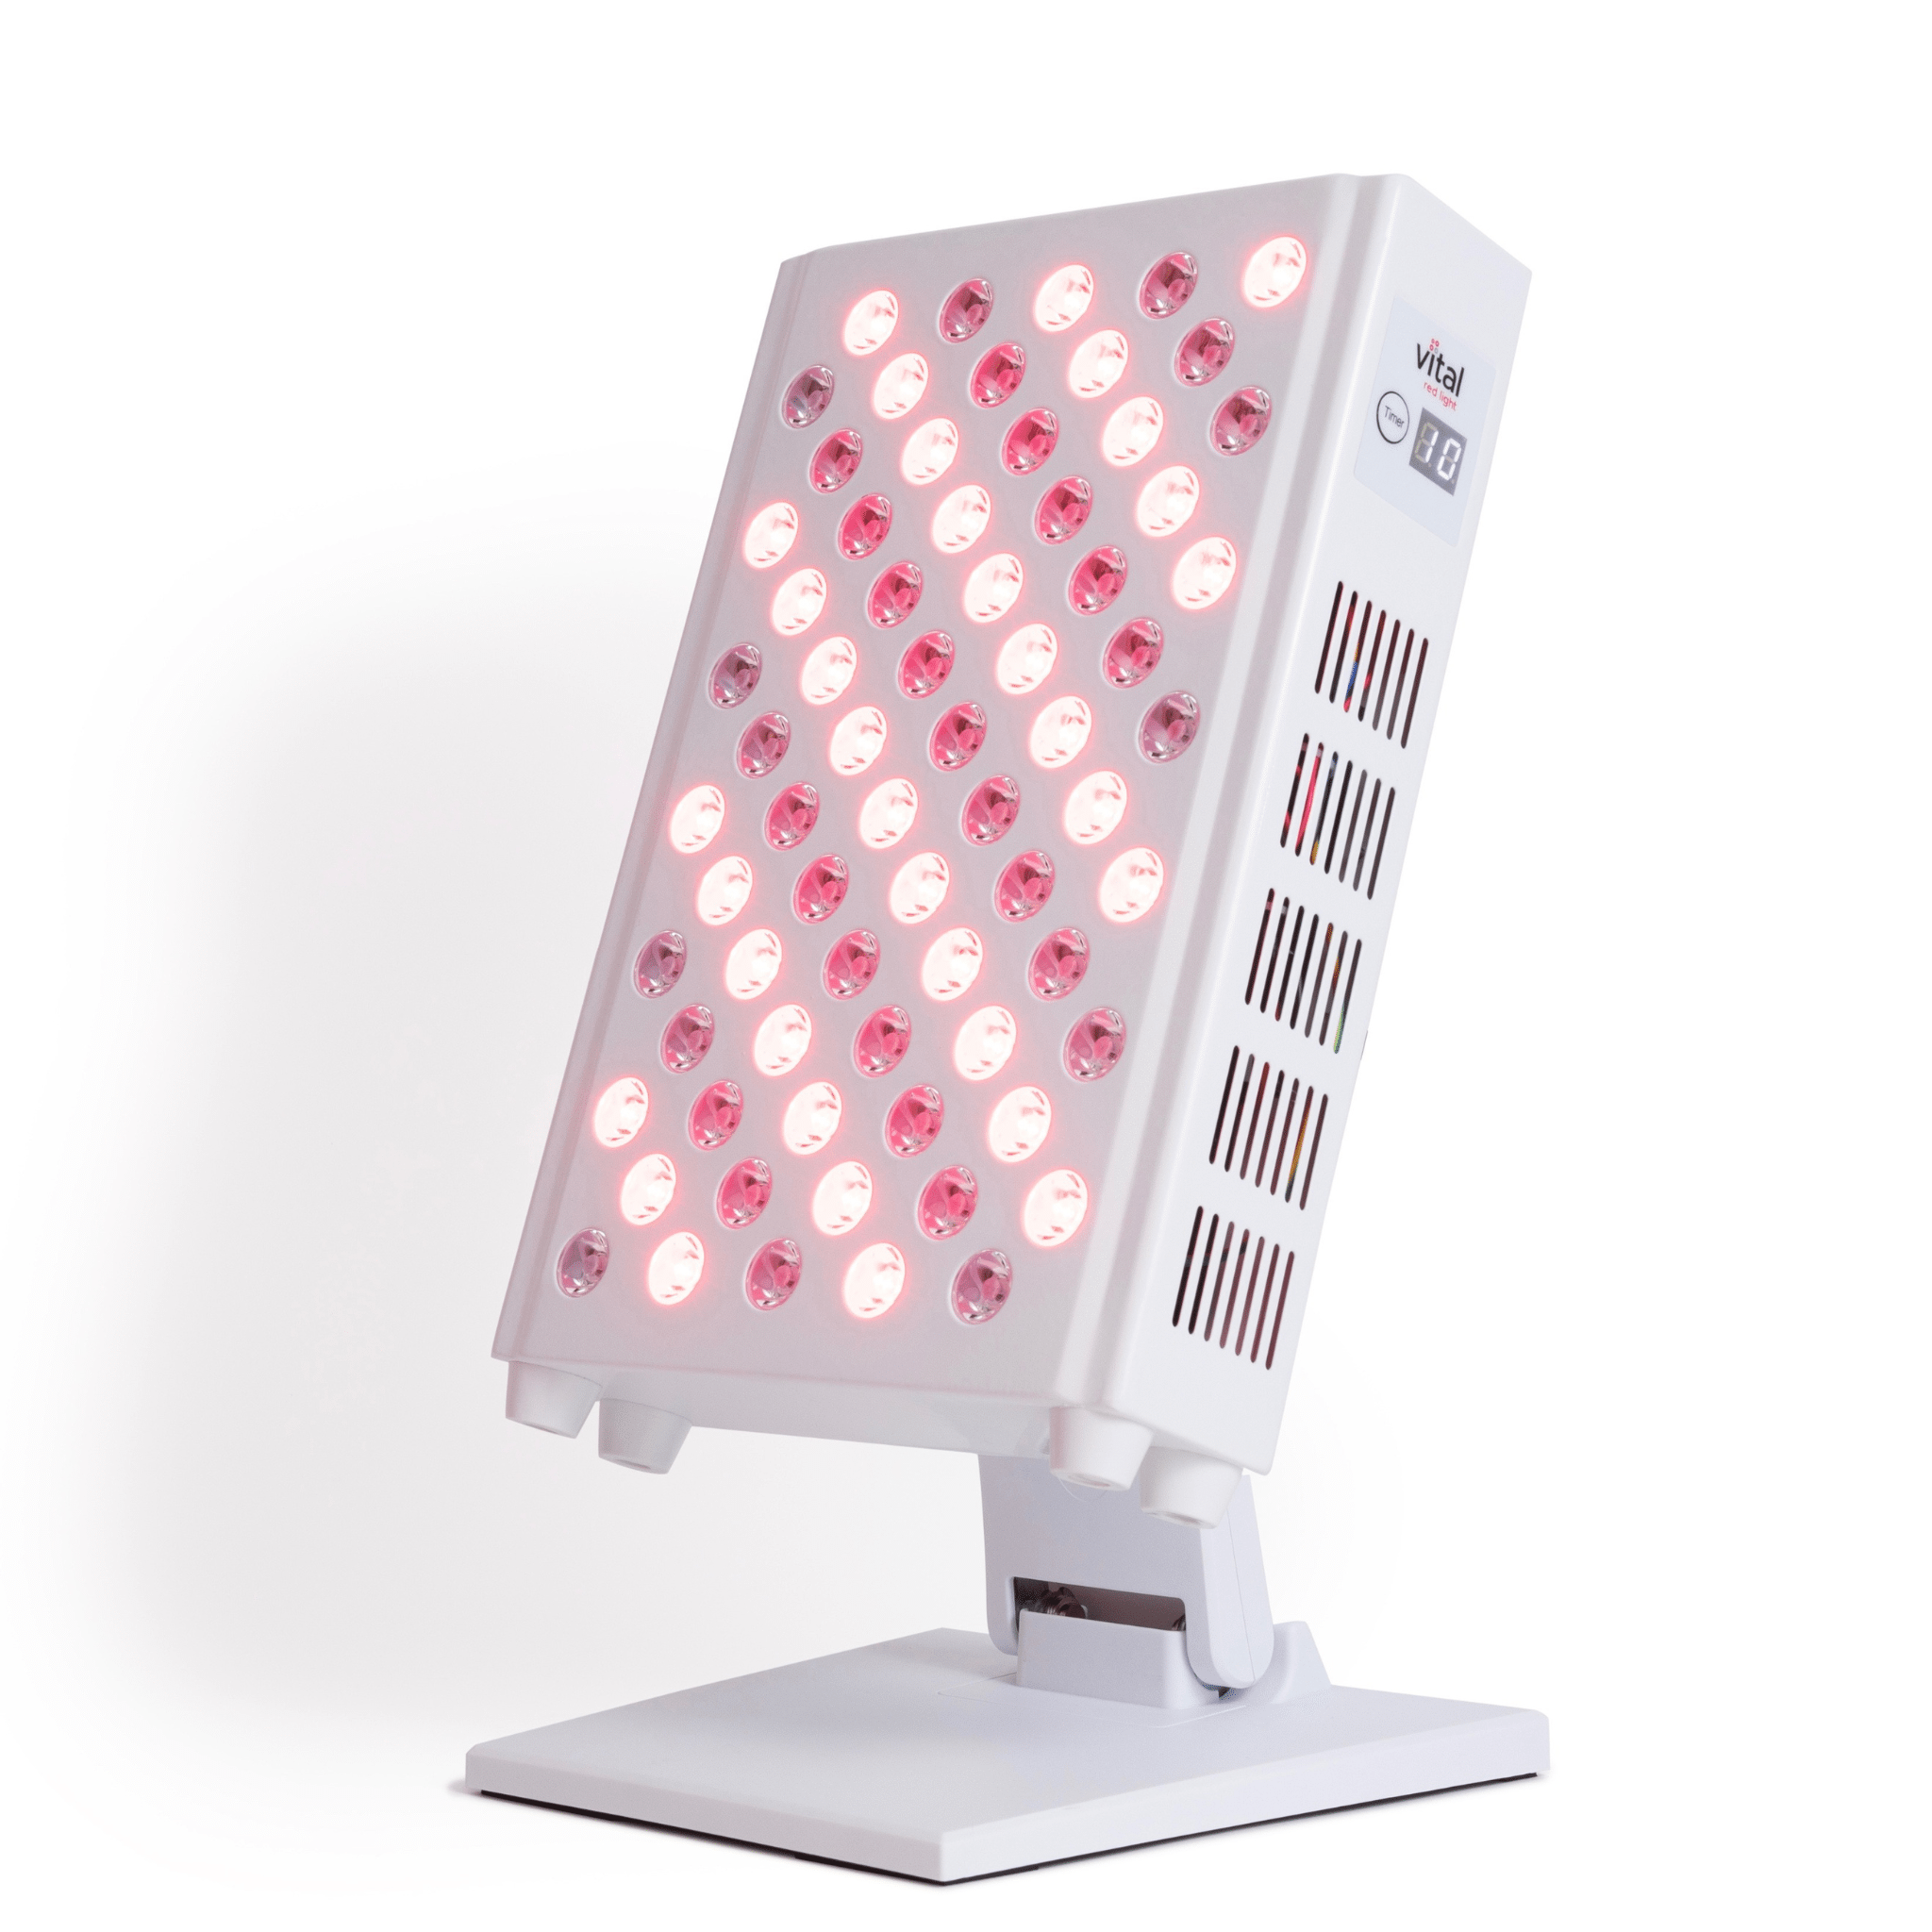 Vital Pro - Red Light Therapy